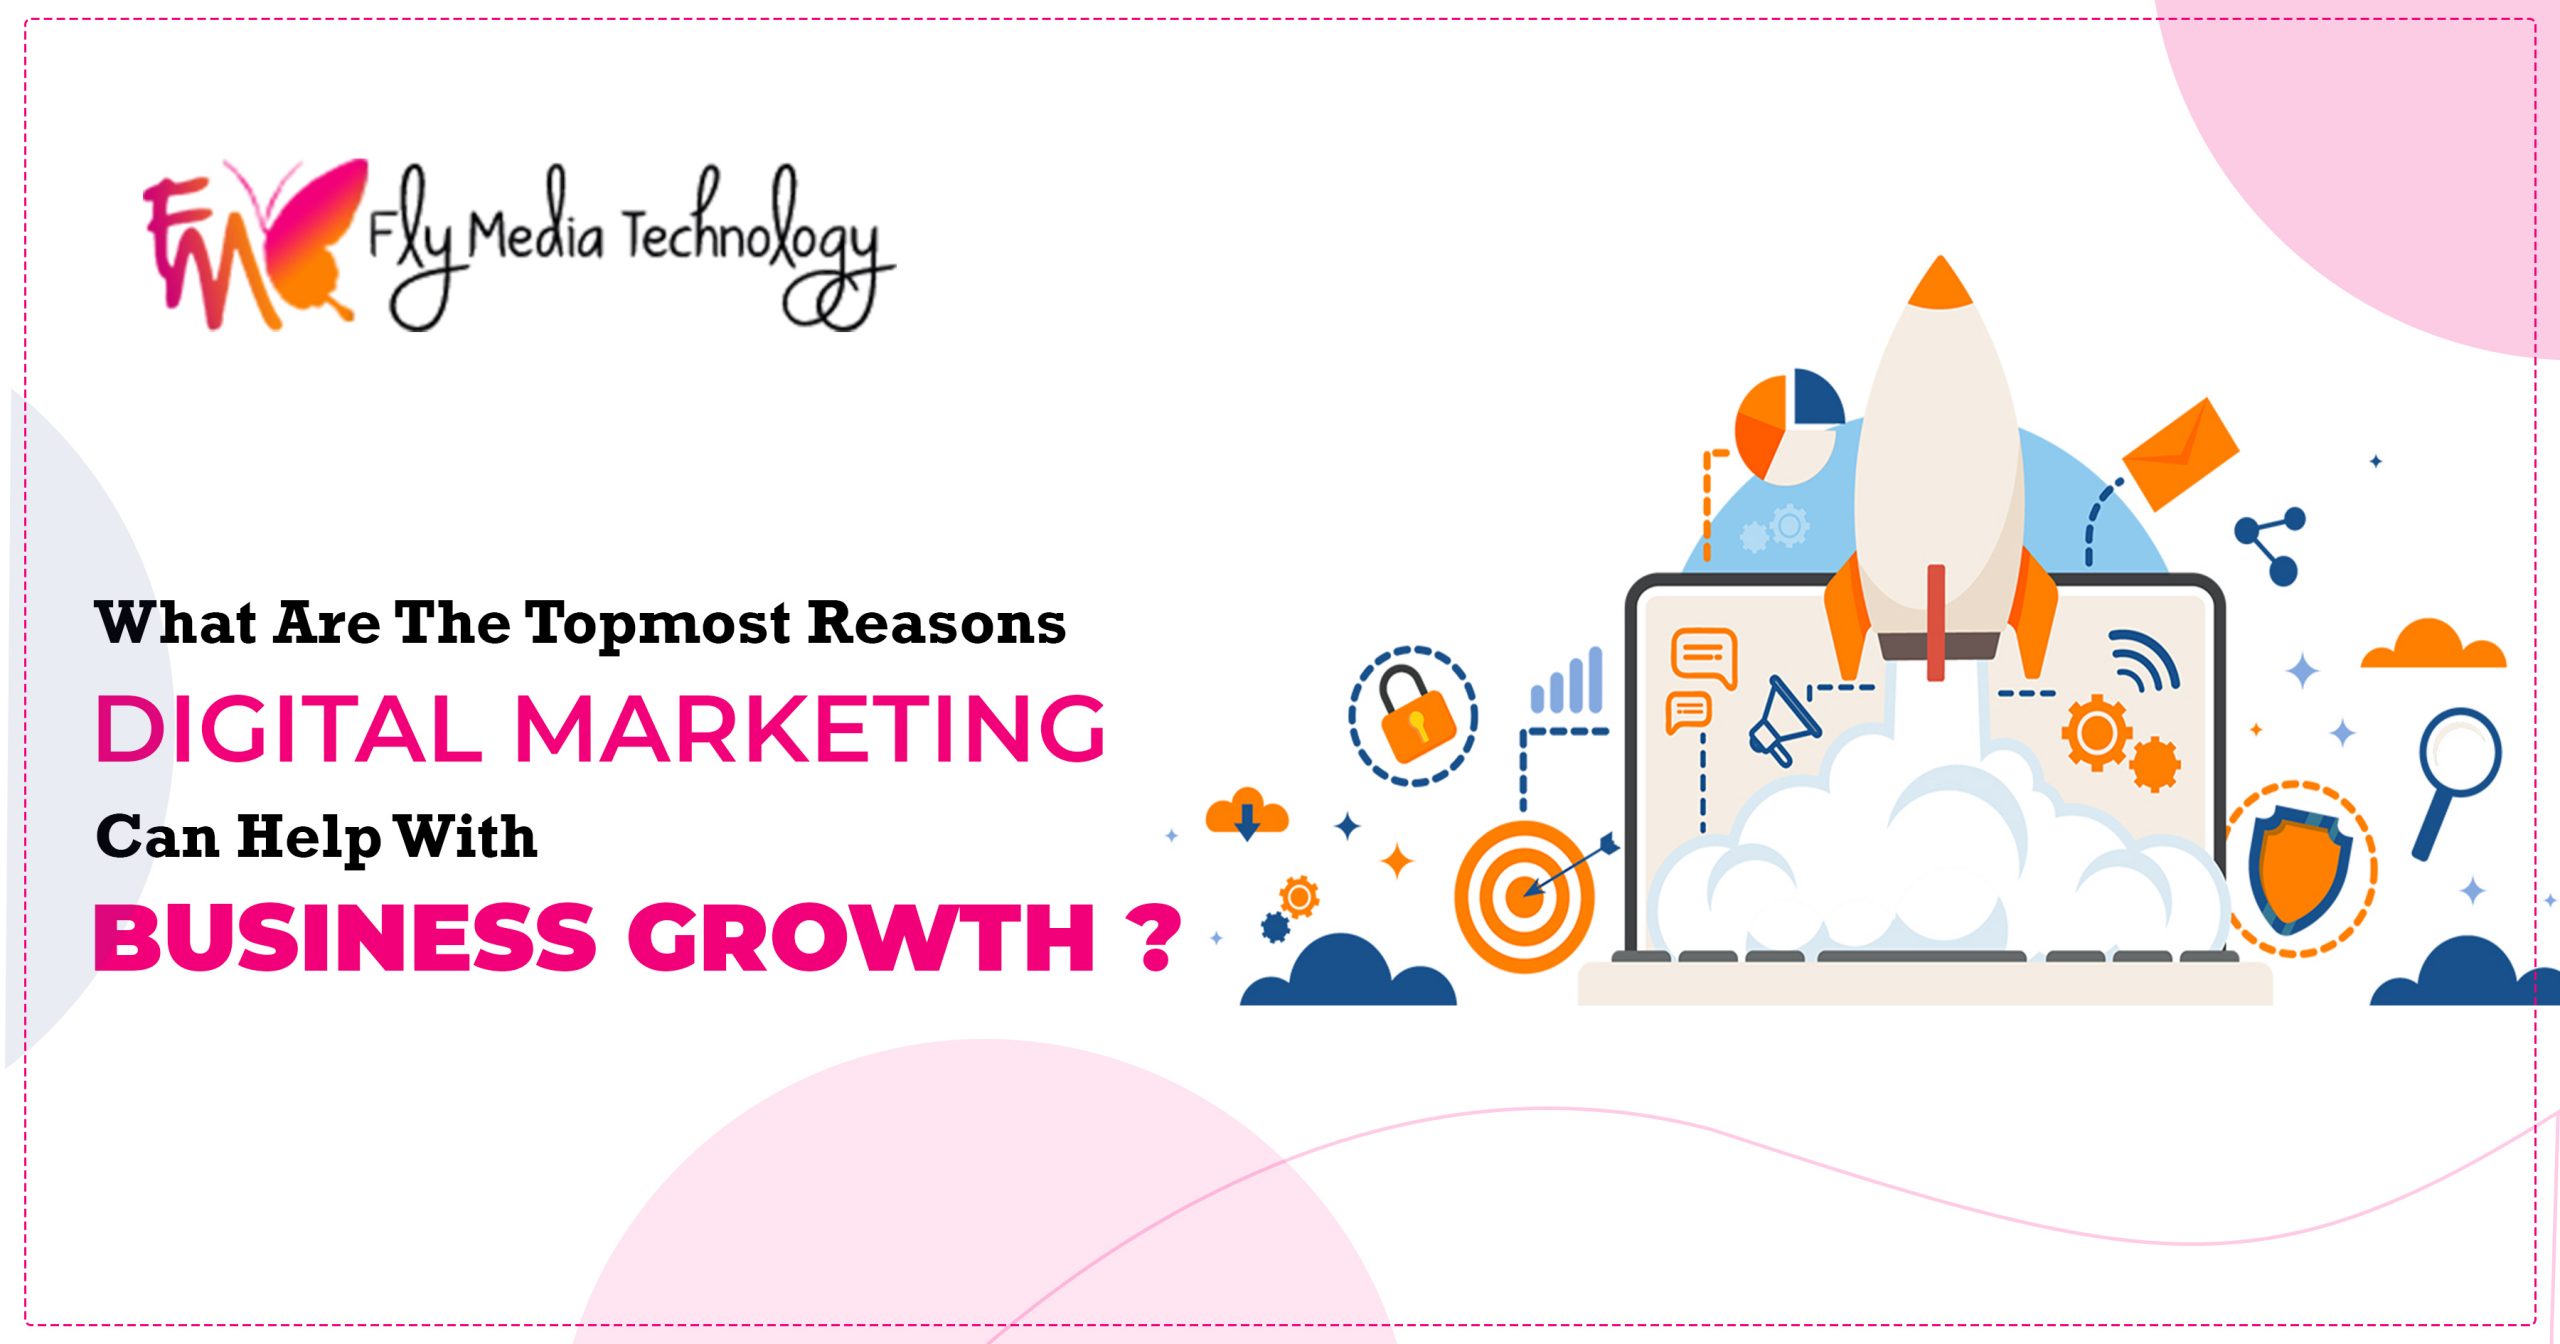 What-are-the-topmost-reasons-digital-marketing-can-help-with-business-growth